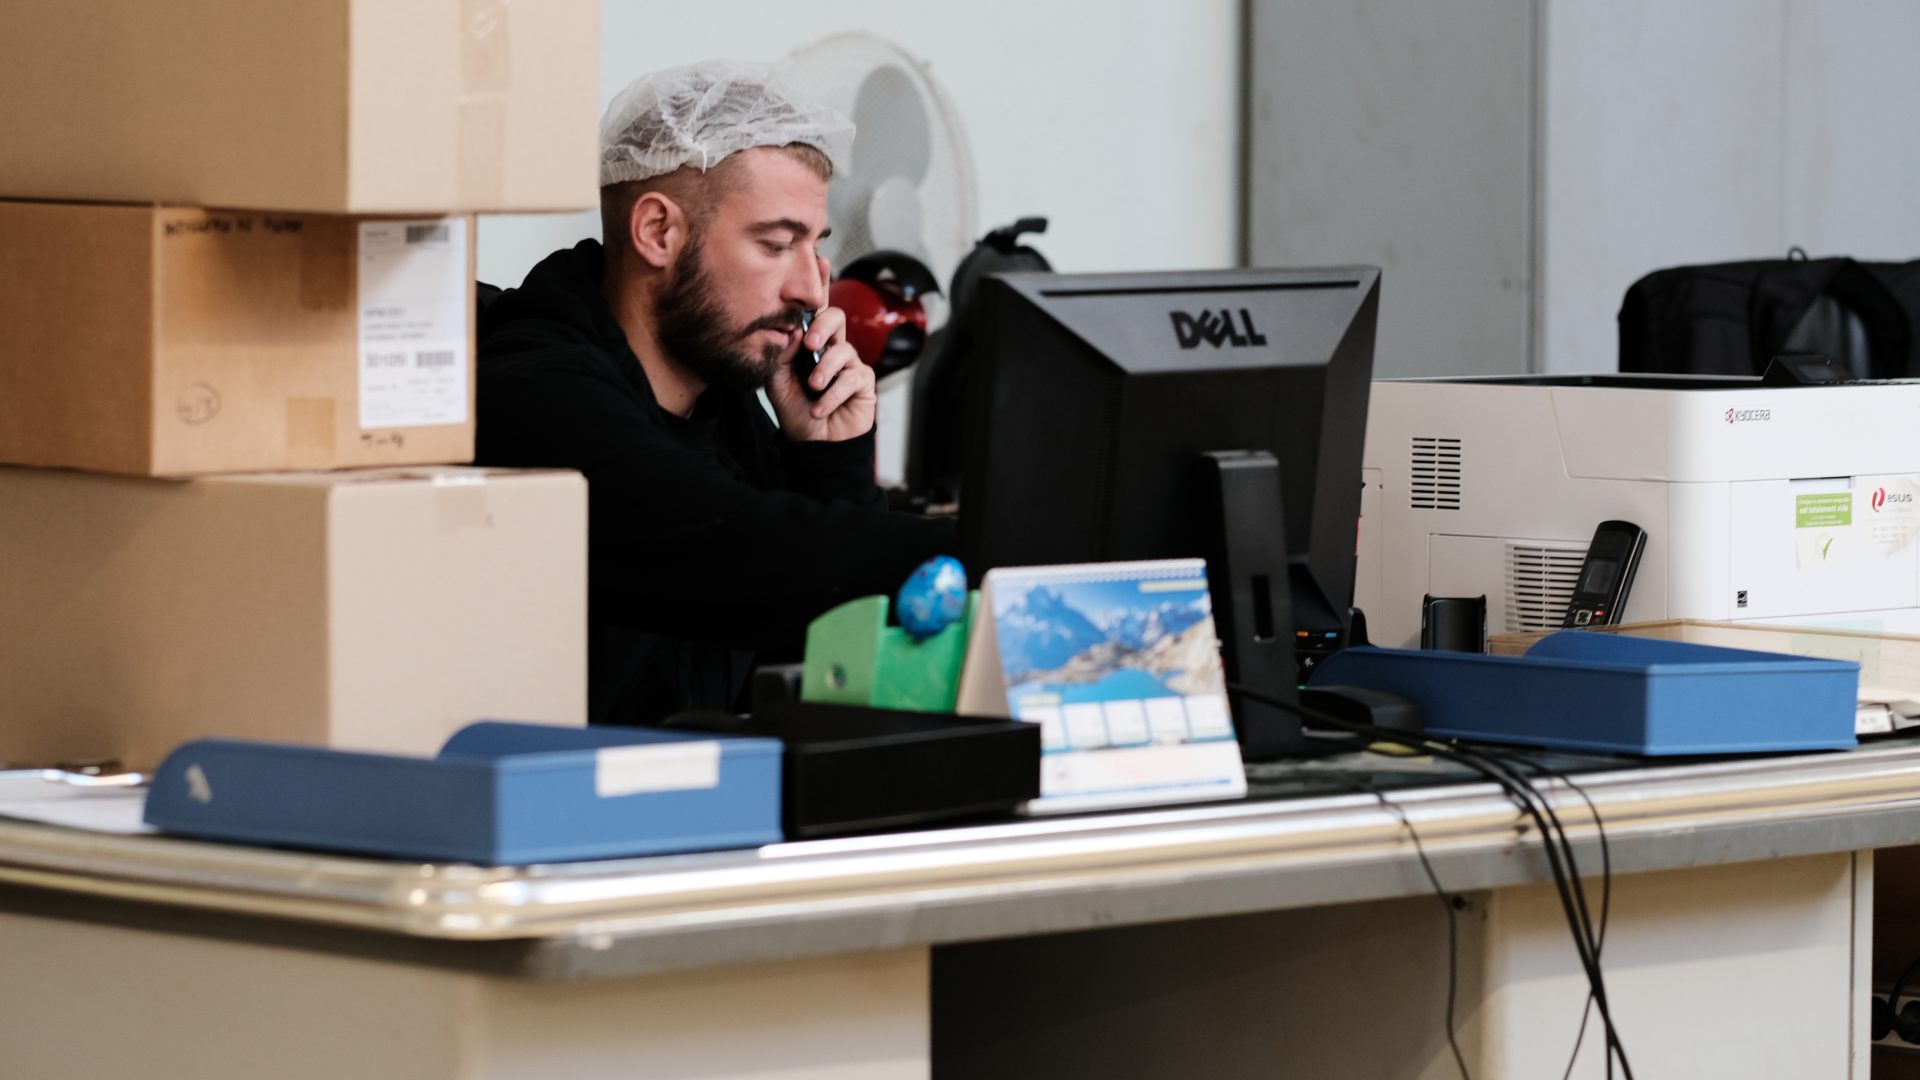 worker at the desk during a conversation on the phone